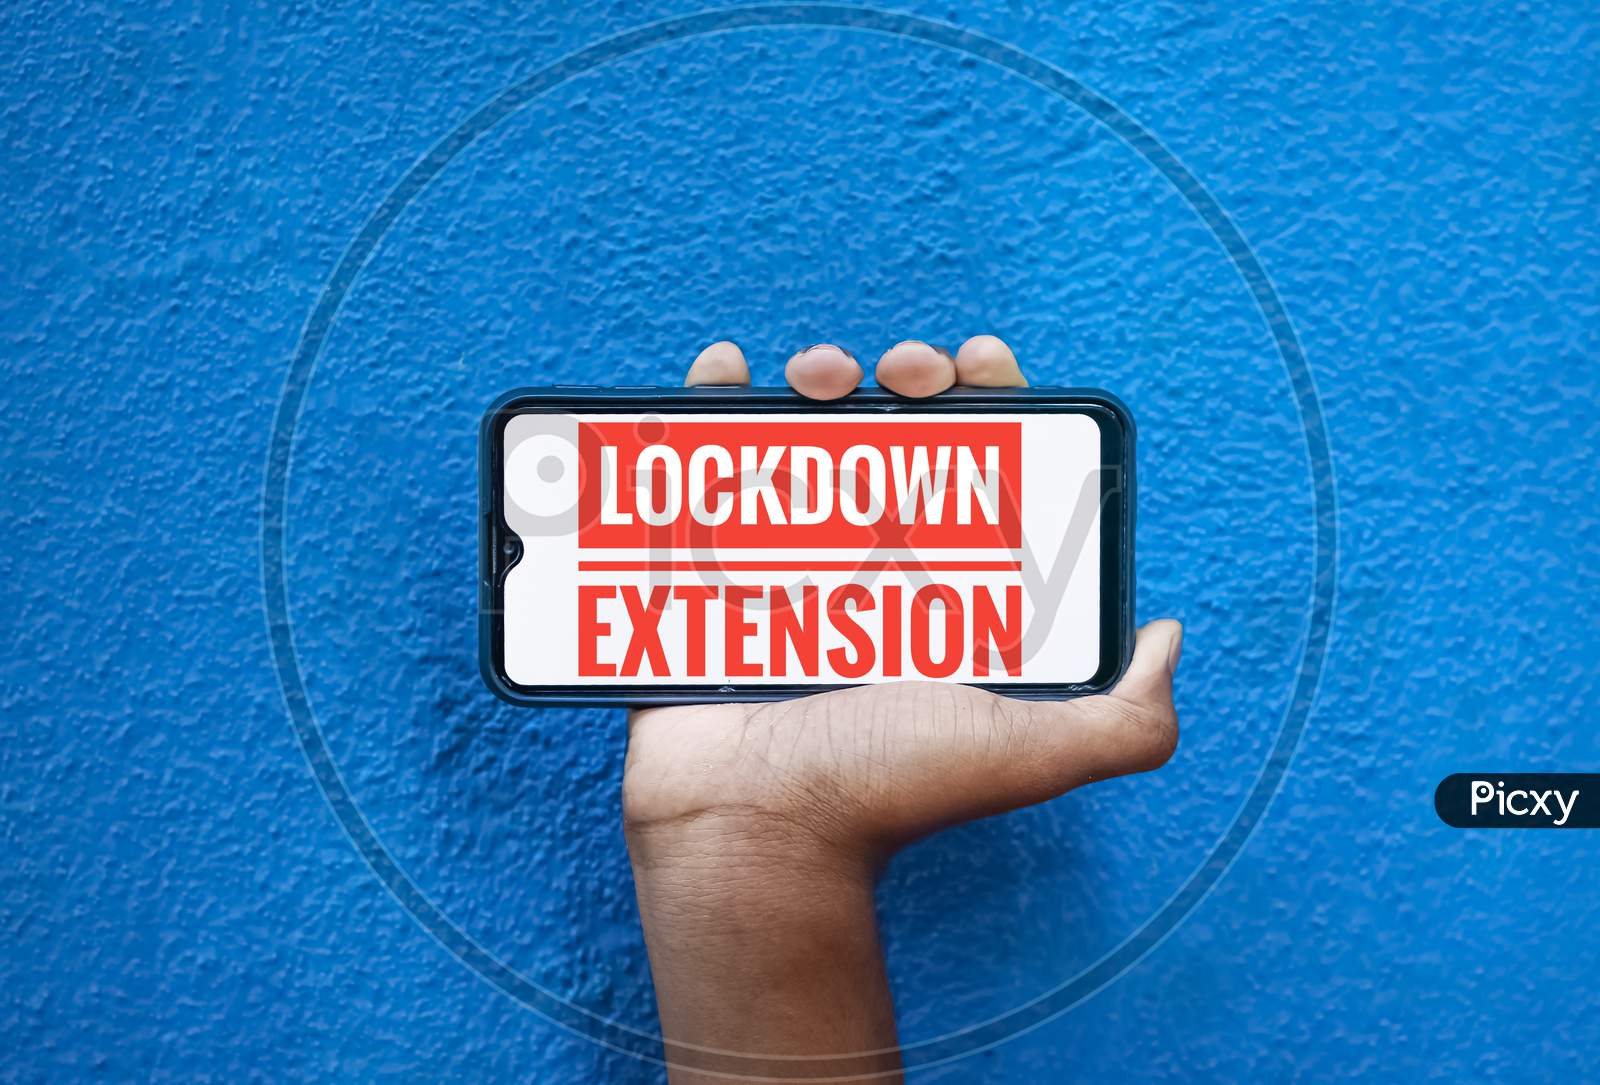 Lock Down Extension Word On Mobile Screen Isolated On Blue Background With Copy Space For Text. Person Holding Mobile On His Hand And Showing Front Of The Screen Wording Lock Down Extension.